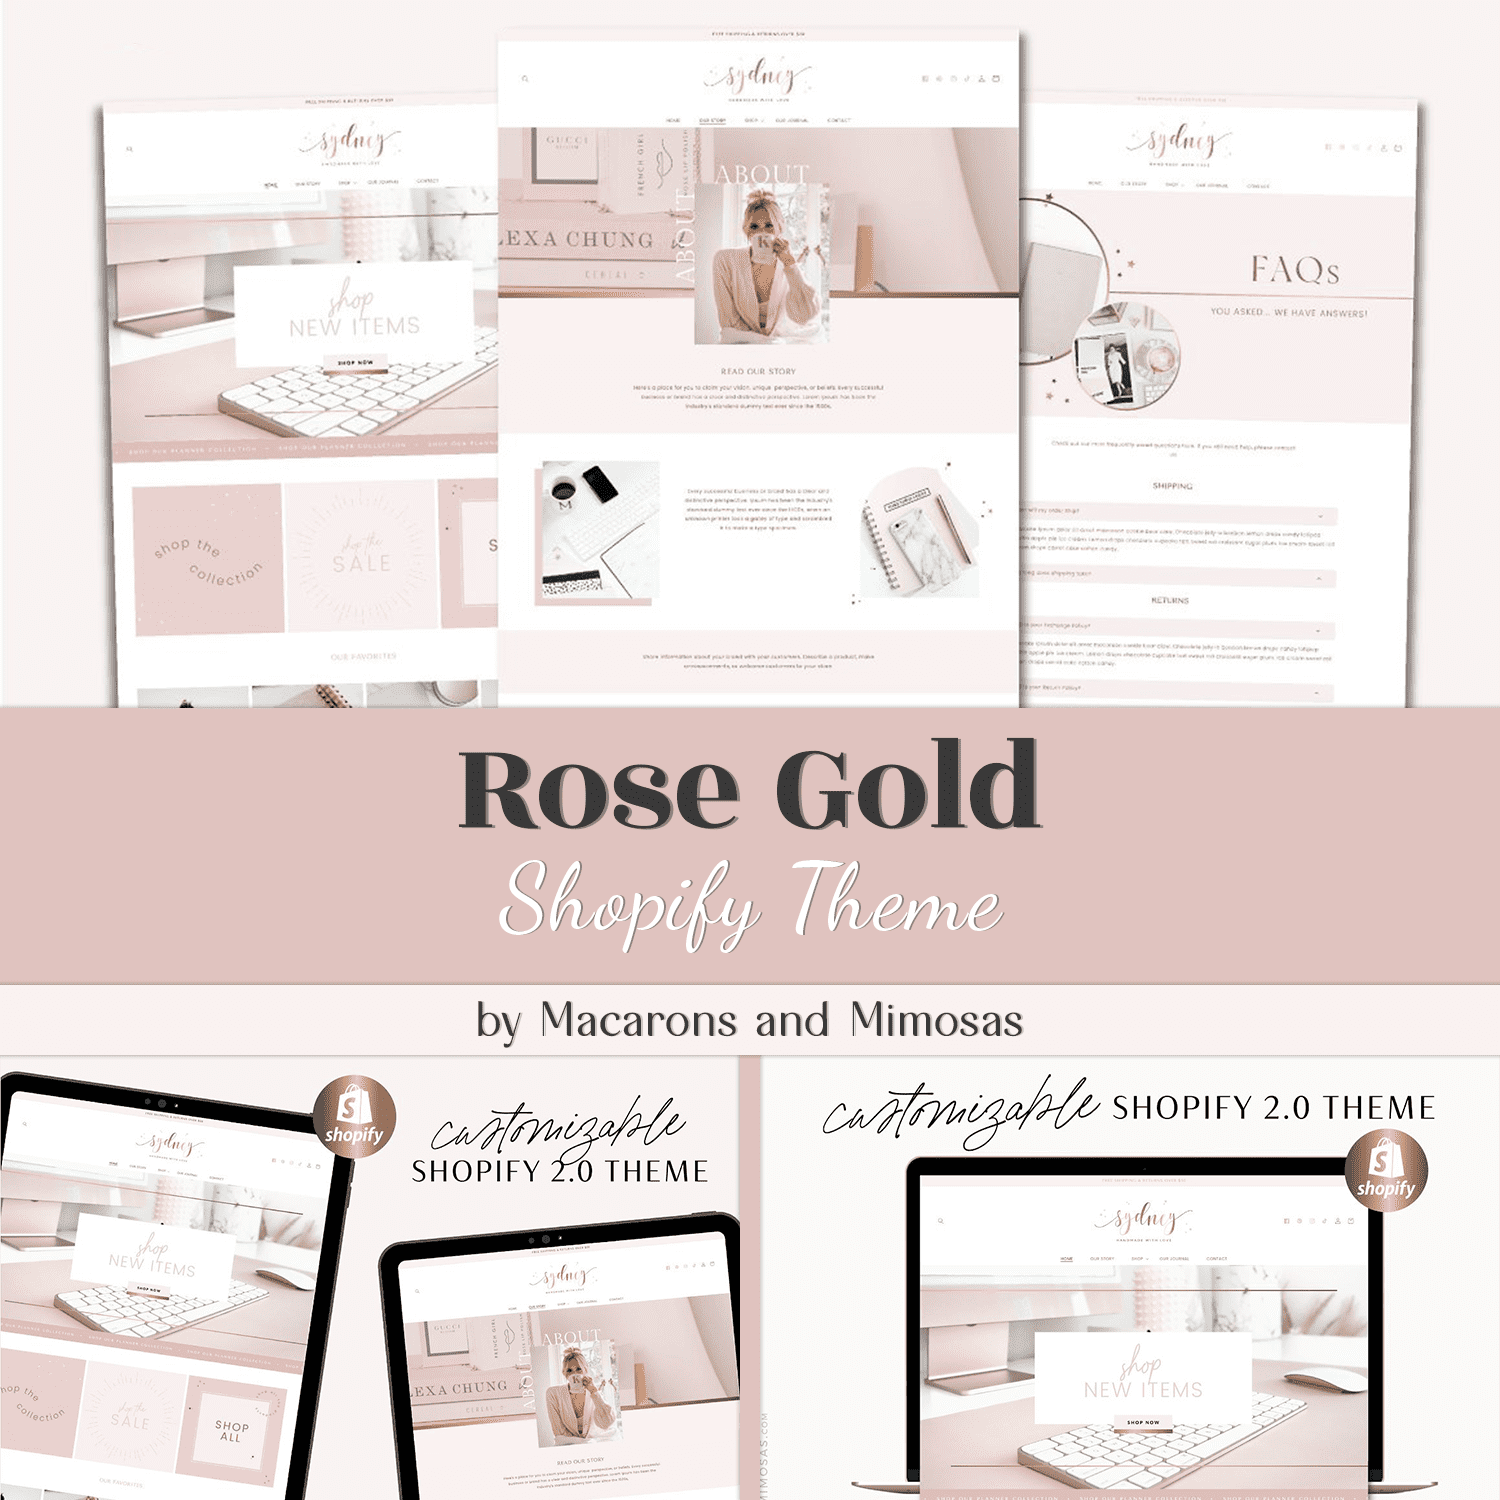 Rose Gold Shopify Theme - main image preview.